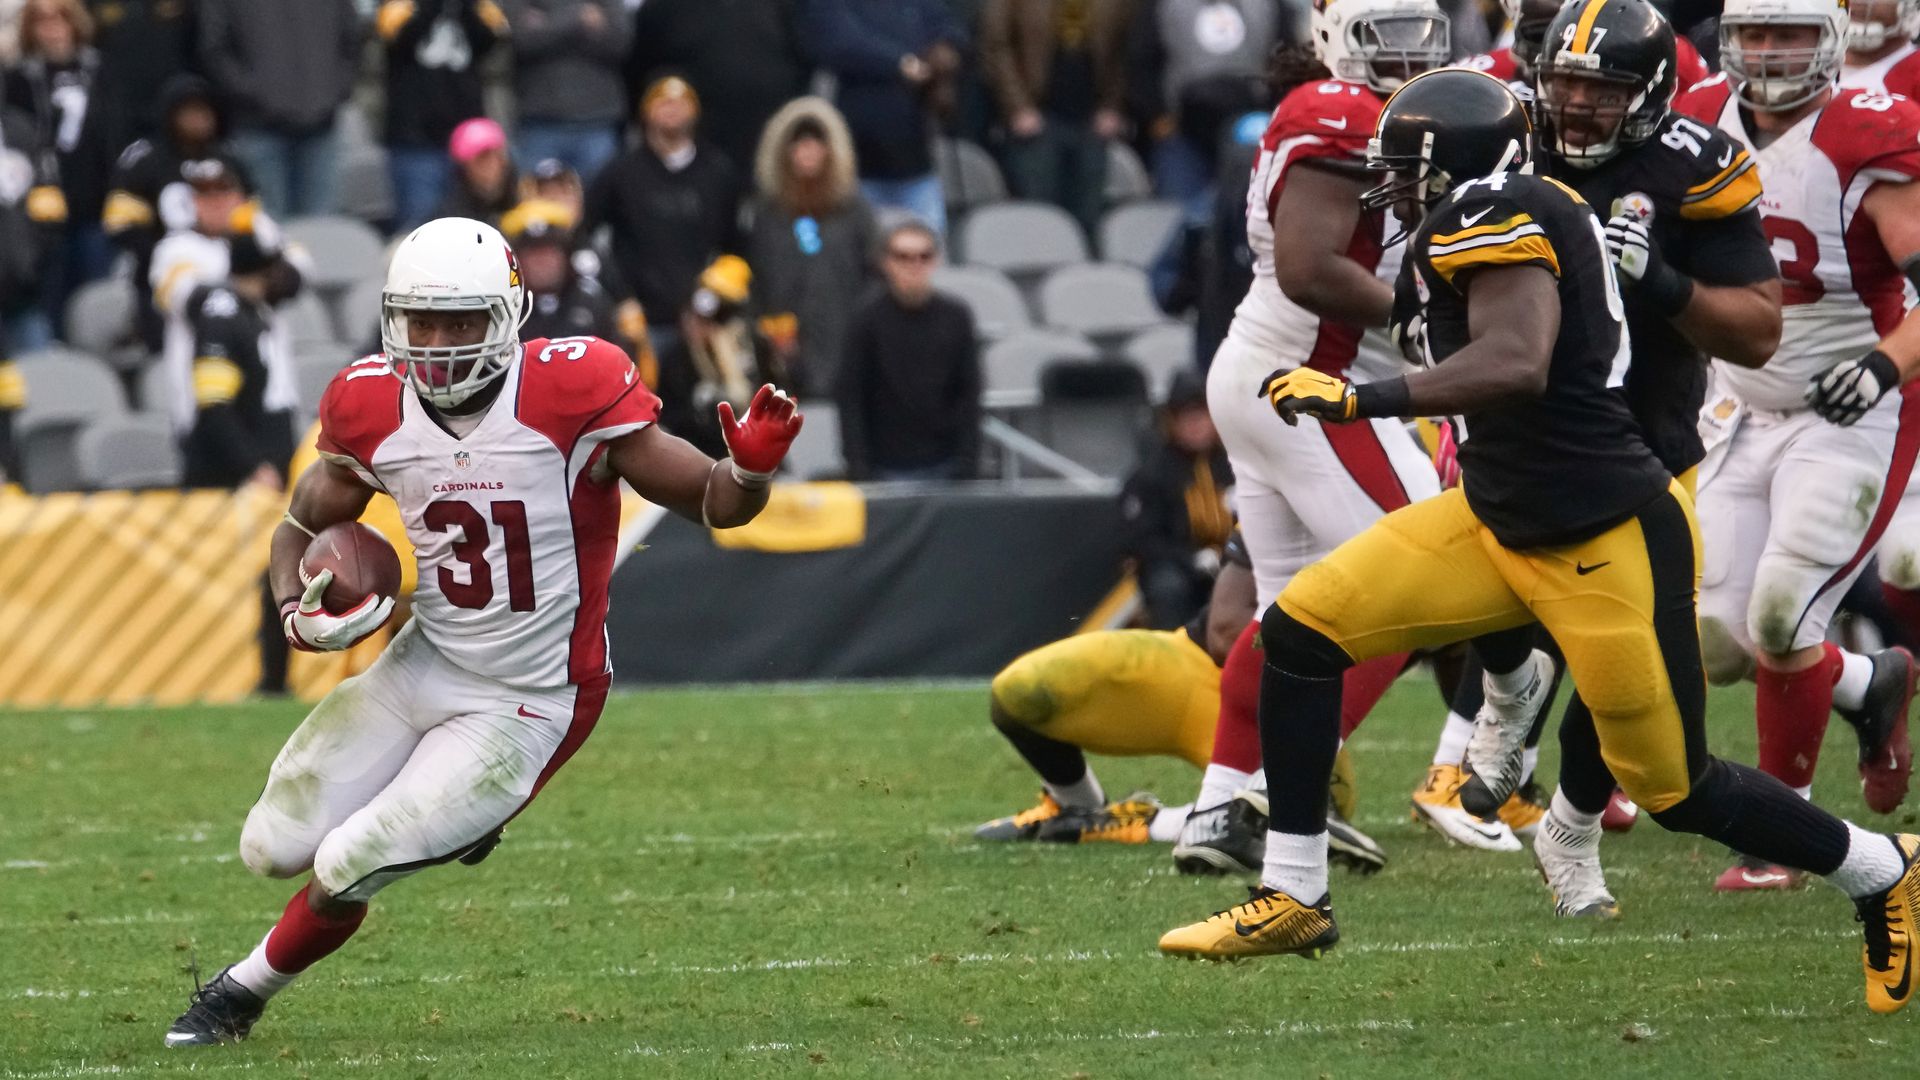 All or Nothing: A Season with the Arizona Cardinals background